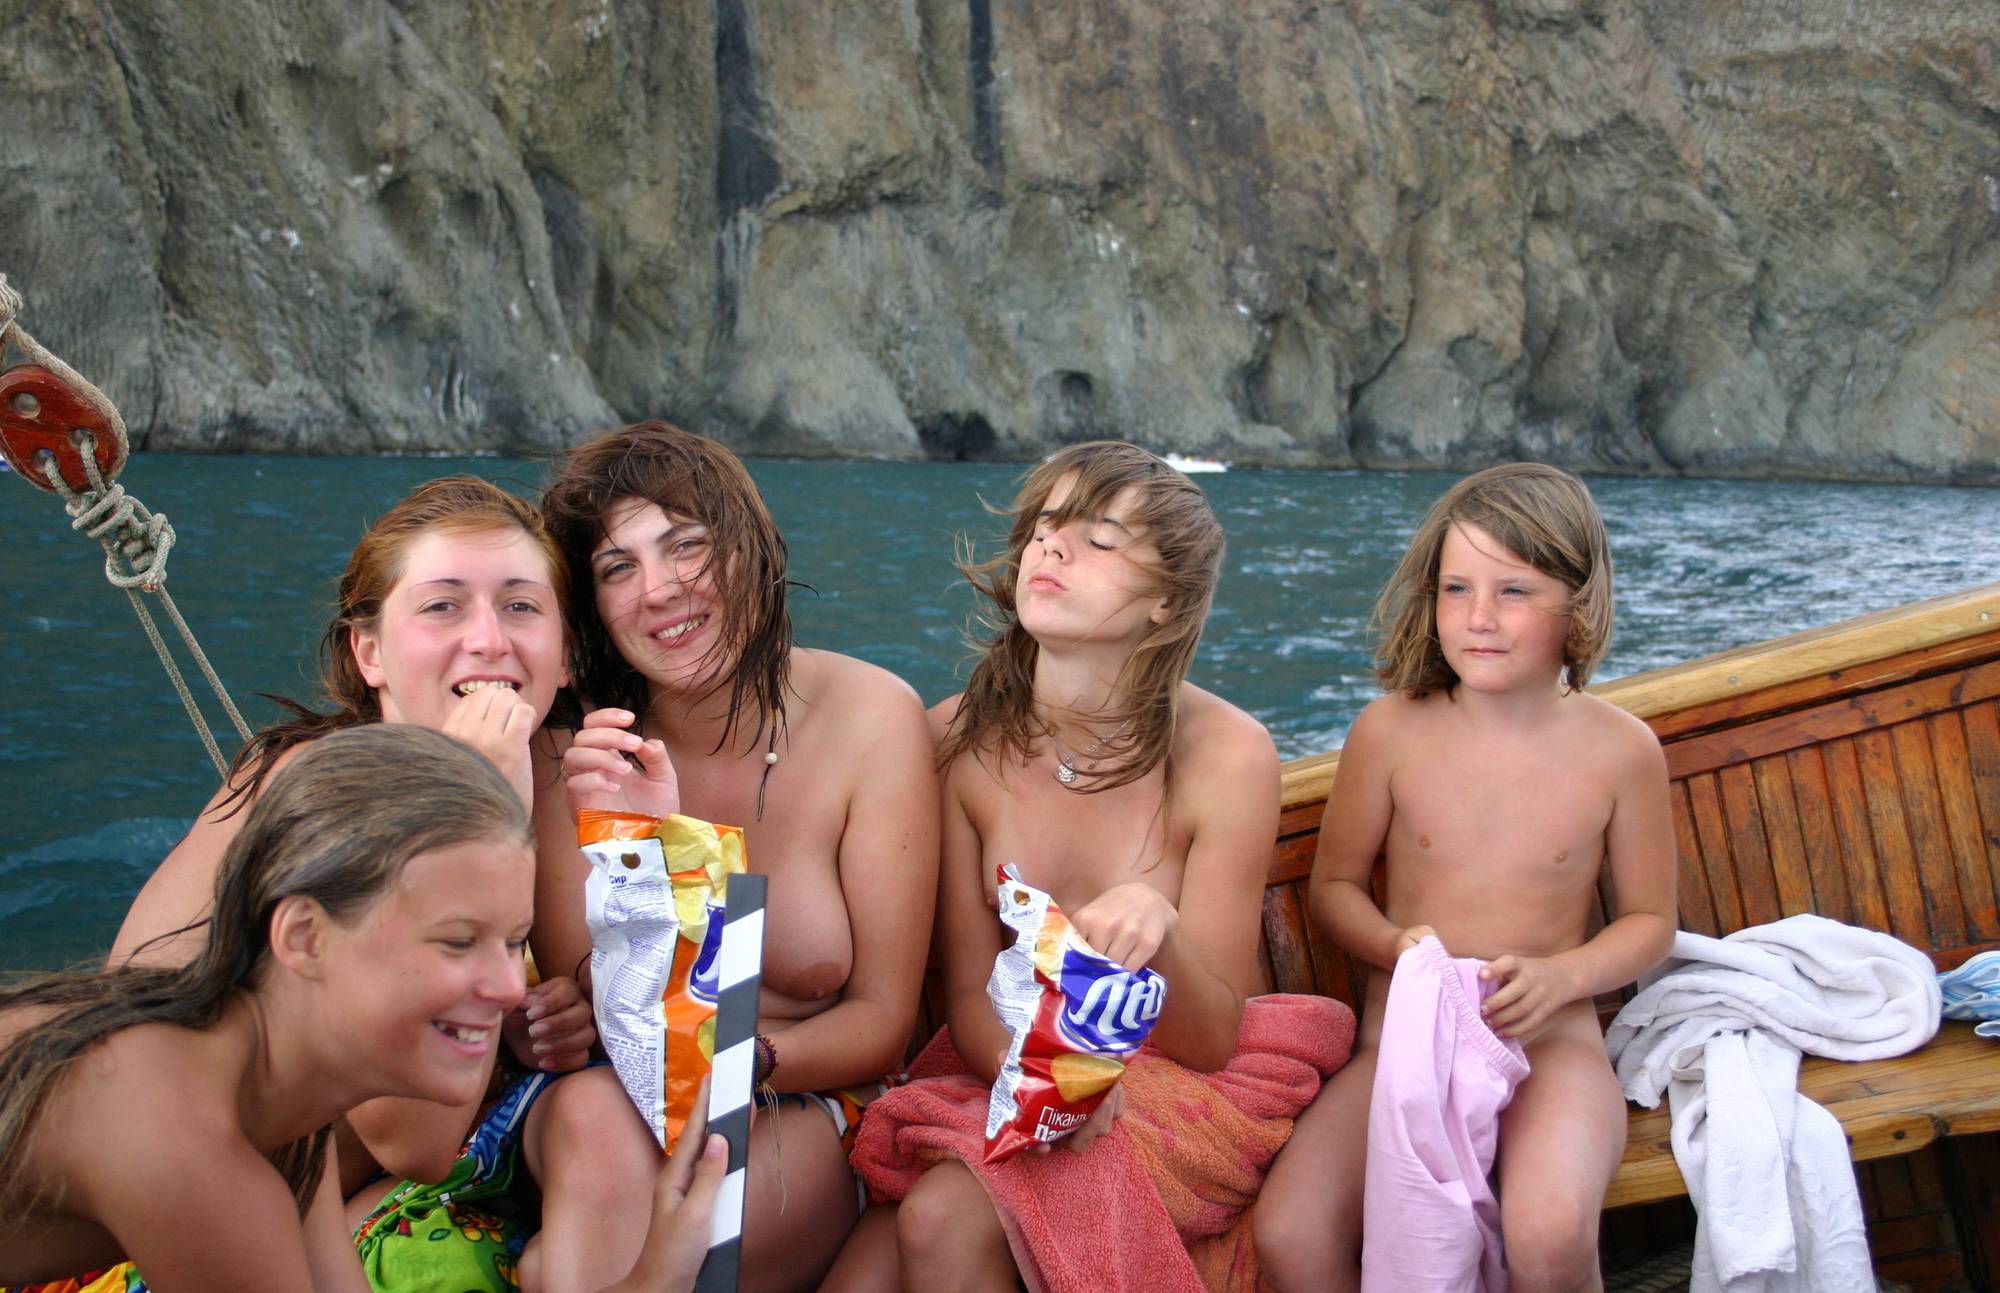 Nudist Pictures Group Snacking on Boat - 1